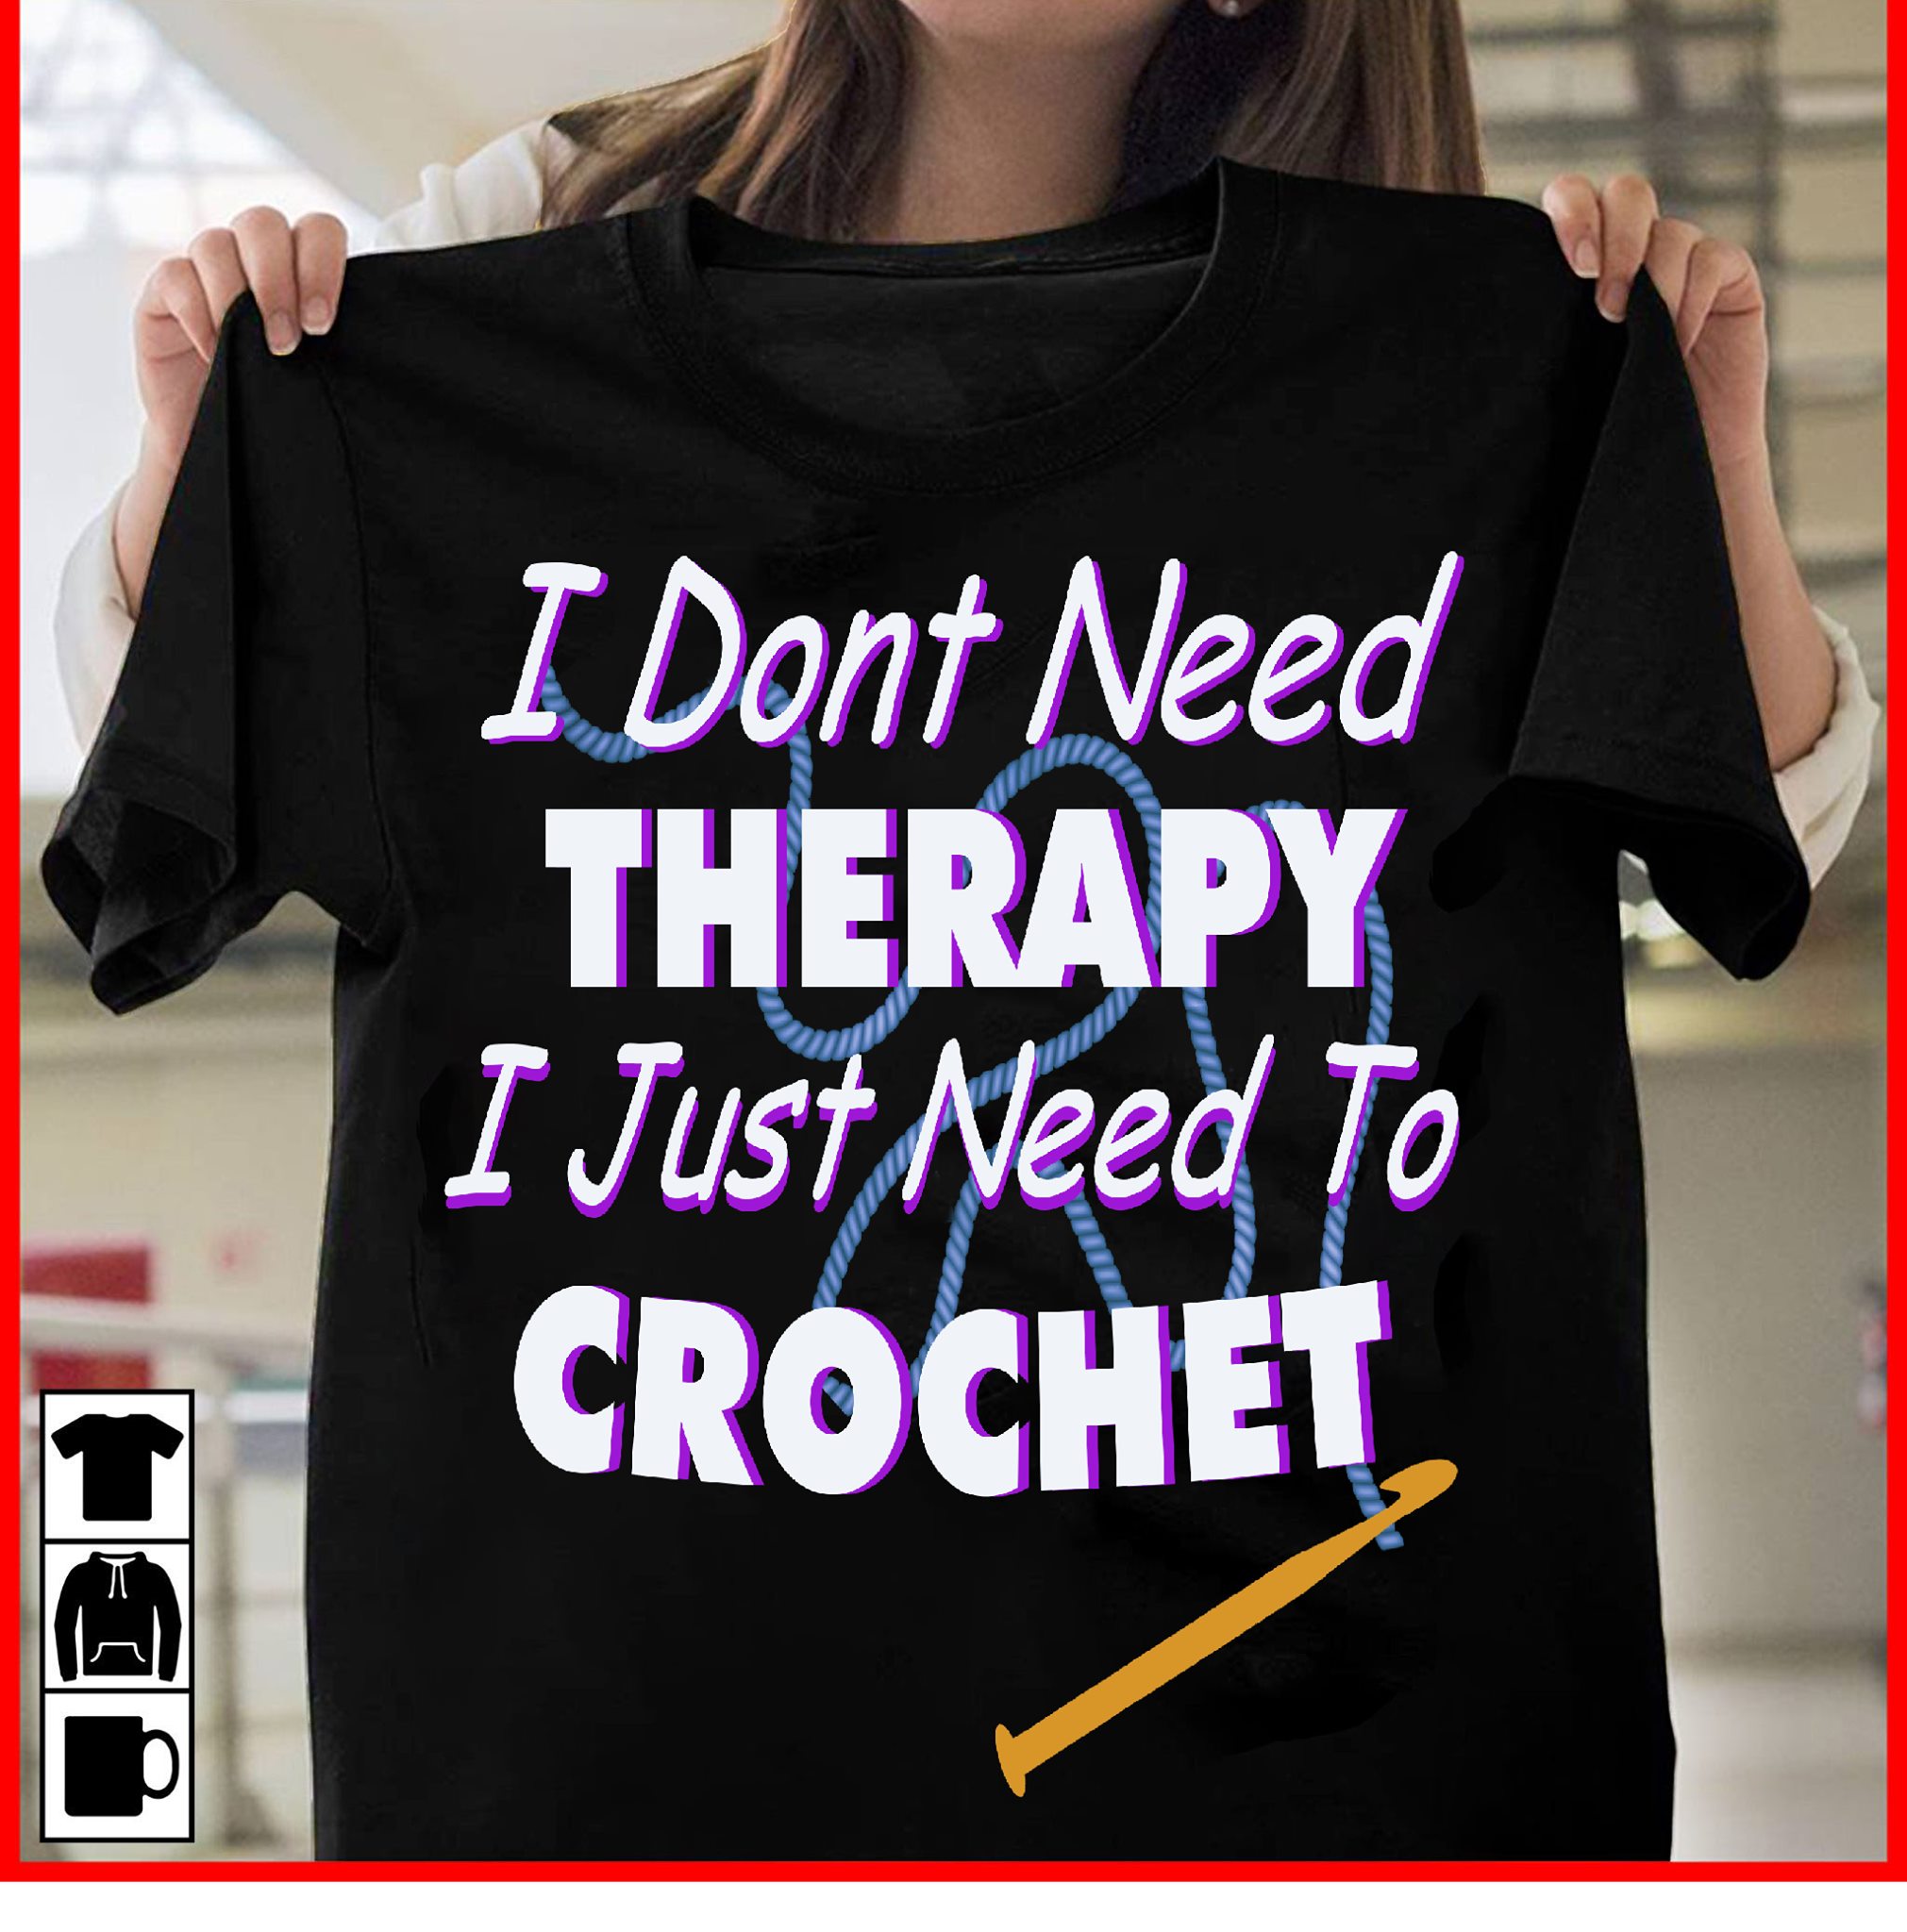 I don't need therapy I just need to crochet - Love crocheting